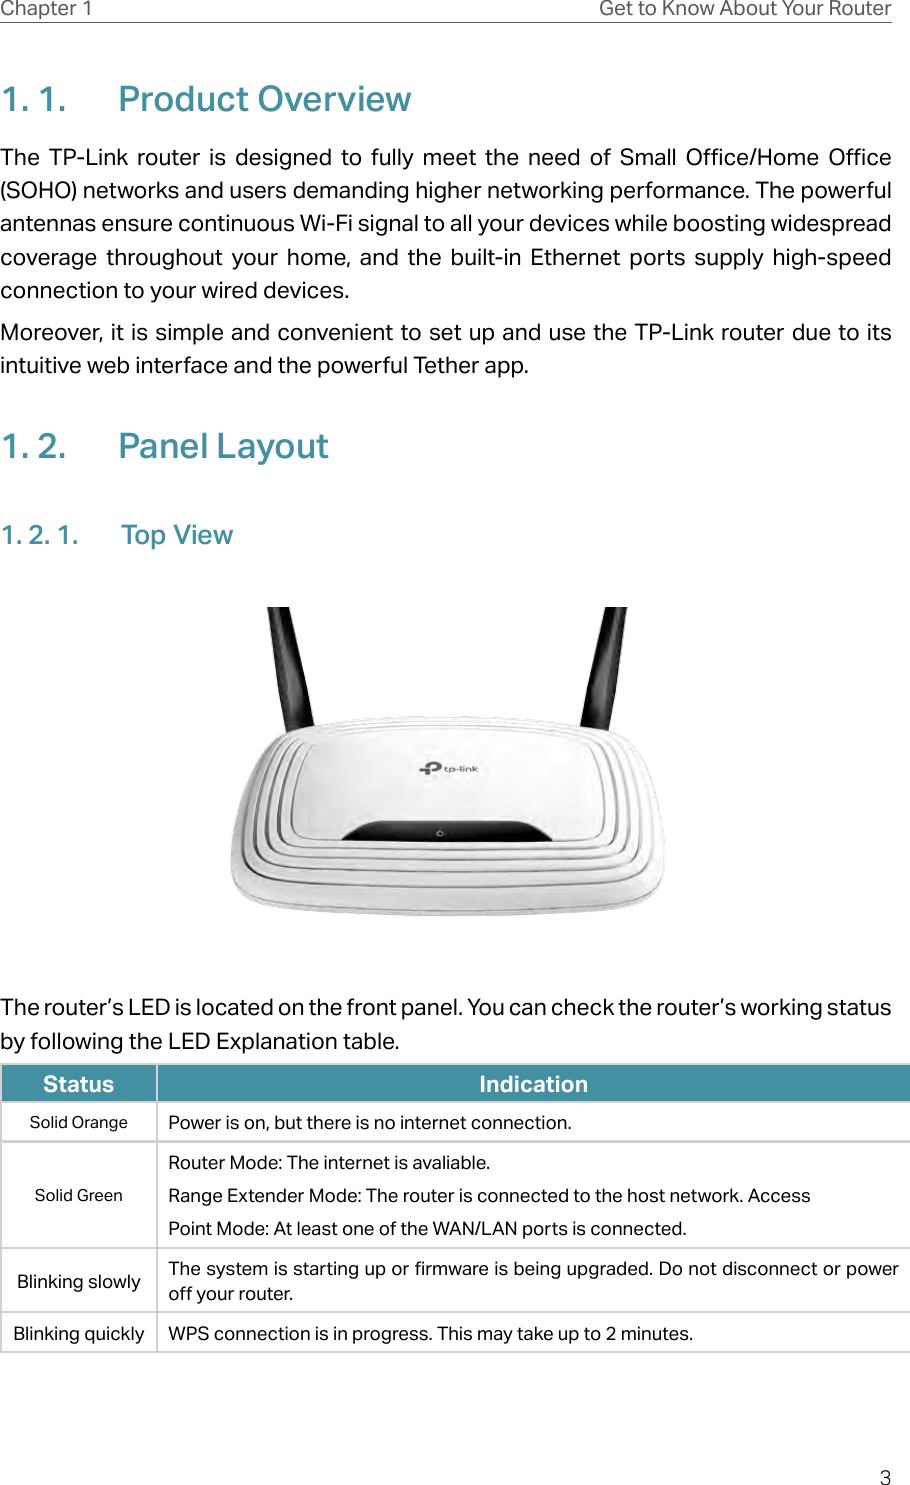 3Chapter 1 Get to Know About Your Router1. 1.  Product OverviewThe TP-Link router is designed to fully meet the need of Small Office/Home Office (SOHO) networks and users demanding higher networking performance. The powerful antennas ensure continuous Wi-Fi signal to all your devices while boosting widespread coverage throughout your home, and the built-in Ethernet ports supply high-speed connection to your wired devices.Moreover, it is simple and convenient to set up and use the TP-Link router due to its intuitive web interface and the powerful Tether app.1. 2.  Panel Layout1. 2. 1.  Top ViewThe router’s LED is located on the front panel. You can check the router’s working status by following the LED Explanation table.Status IndicationSolid Orange Power is on, but there is no internet connection.Solid GreenRouter Mode: The internet is avaliable.Range Extender Mode: The router is connected to the host network. Access Point Mode: At least one of the WAN/LAN ports is connected.Blinking slowly The system is starting up or firmware is being upgraded. Do not disconnect or power off your router.Blinking quickly WPS connection is in progress. This may take up to 2 minutes.